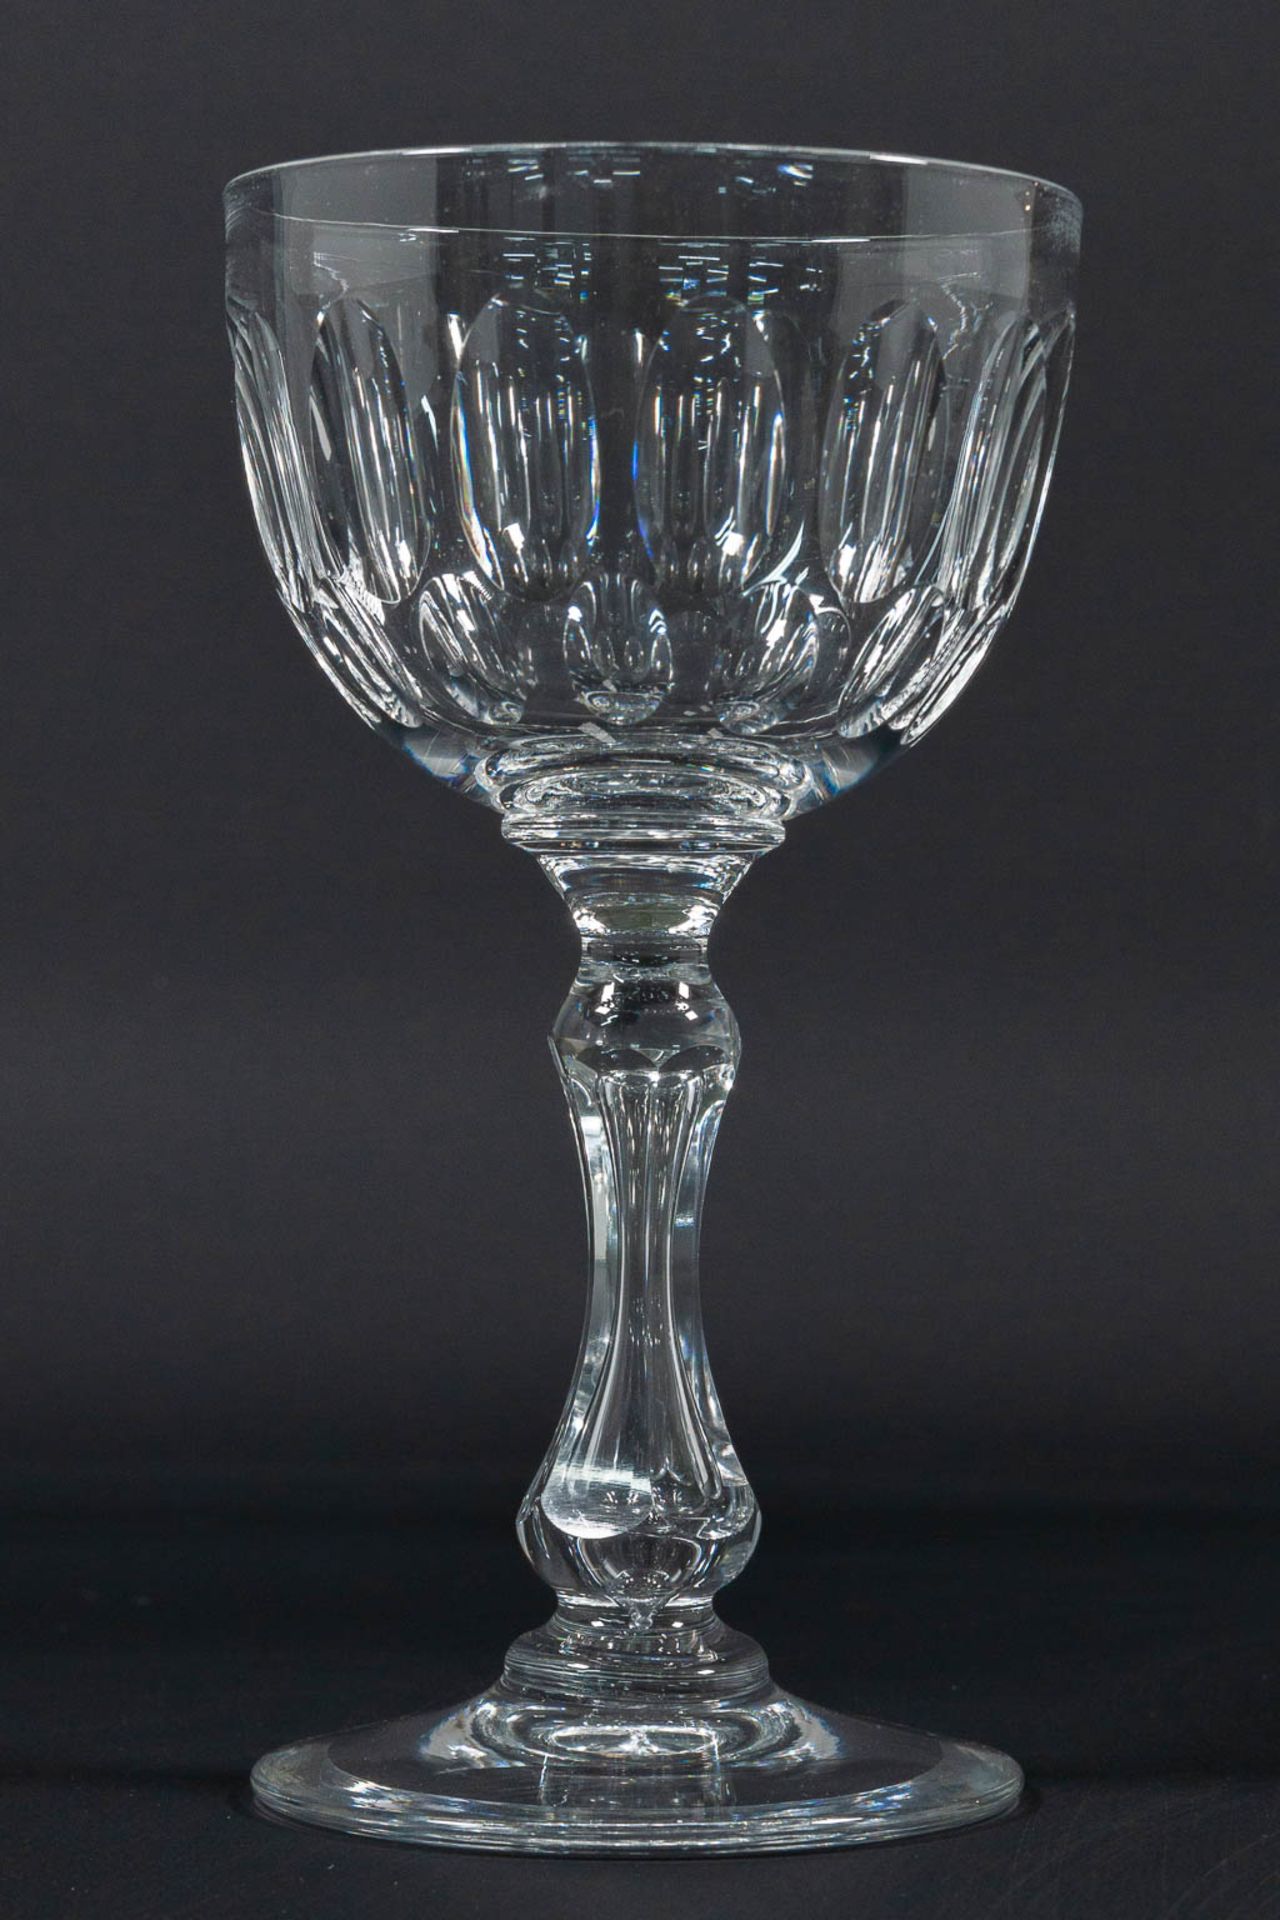 A collection of 34 antique cyrstal glasses with cut sides. - Image 4 of 6